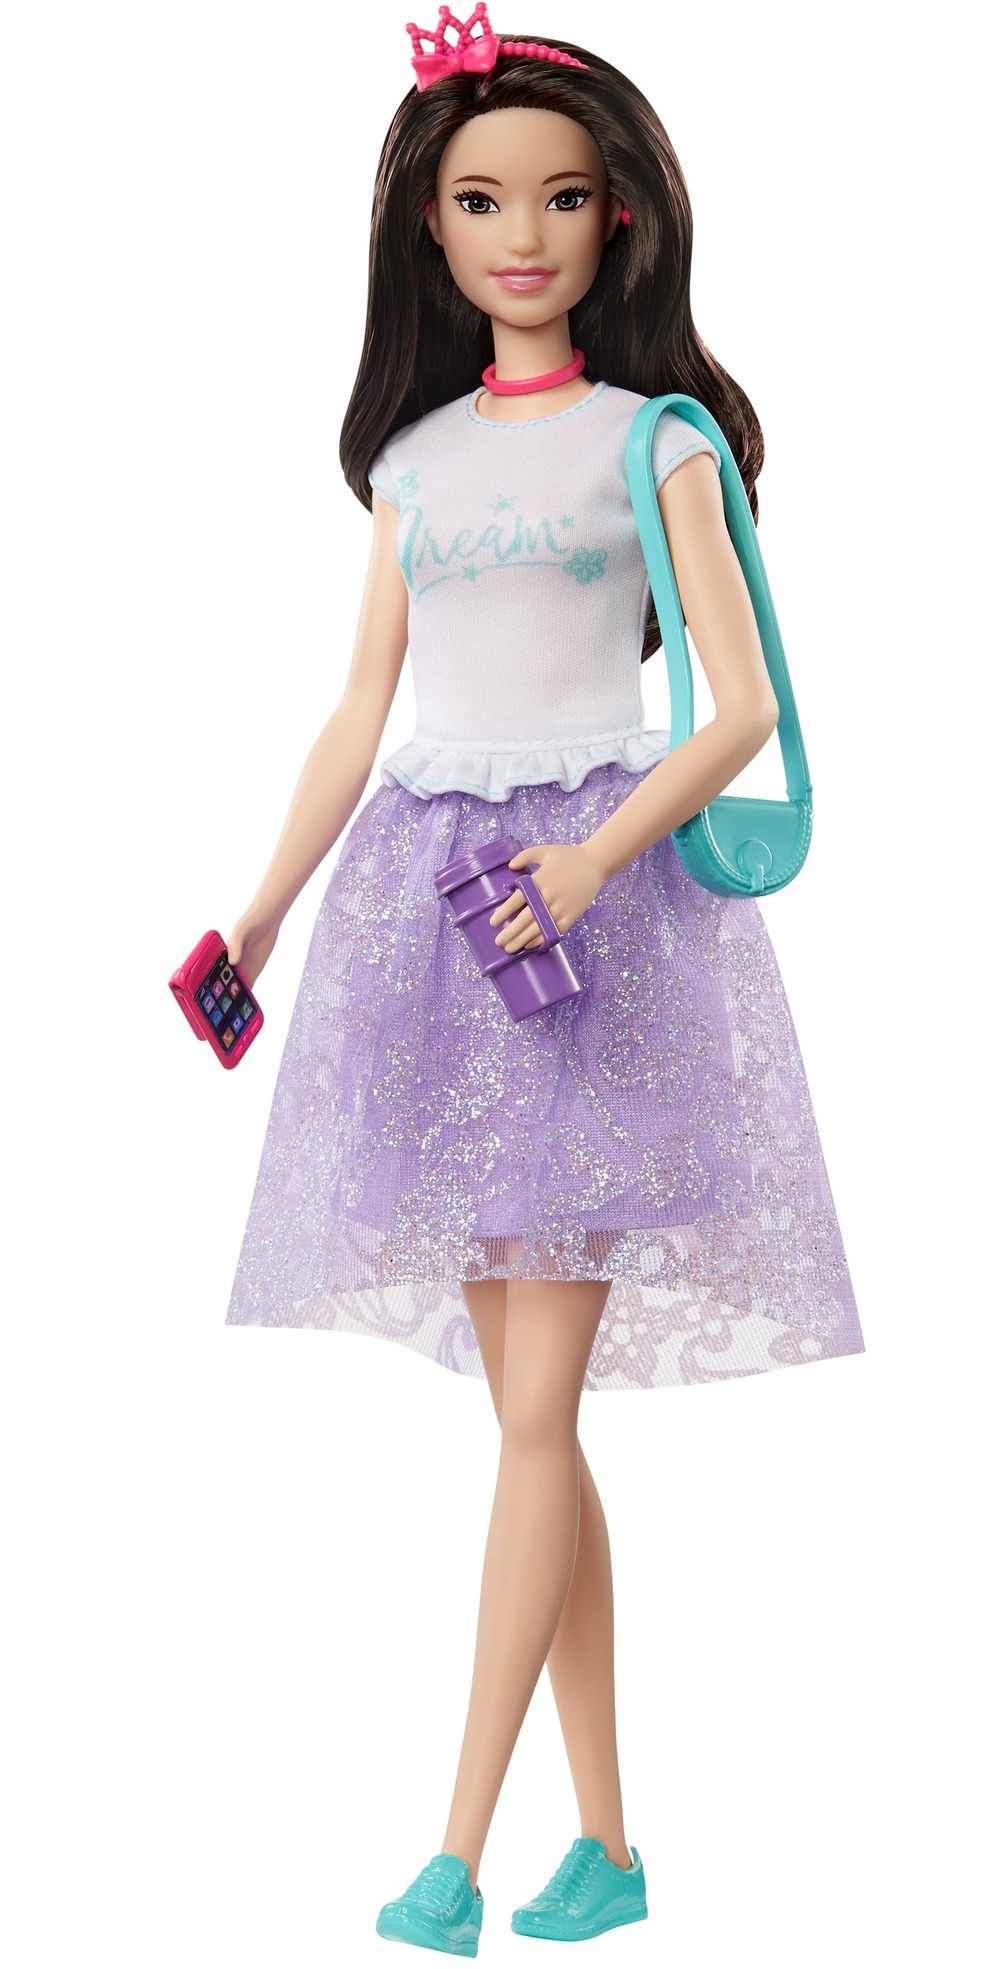 Barbie Princess Adventure Renee Doll (12-inch) in Fashion and Accessories - image 1 of 7